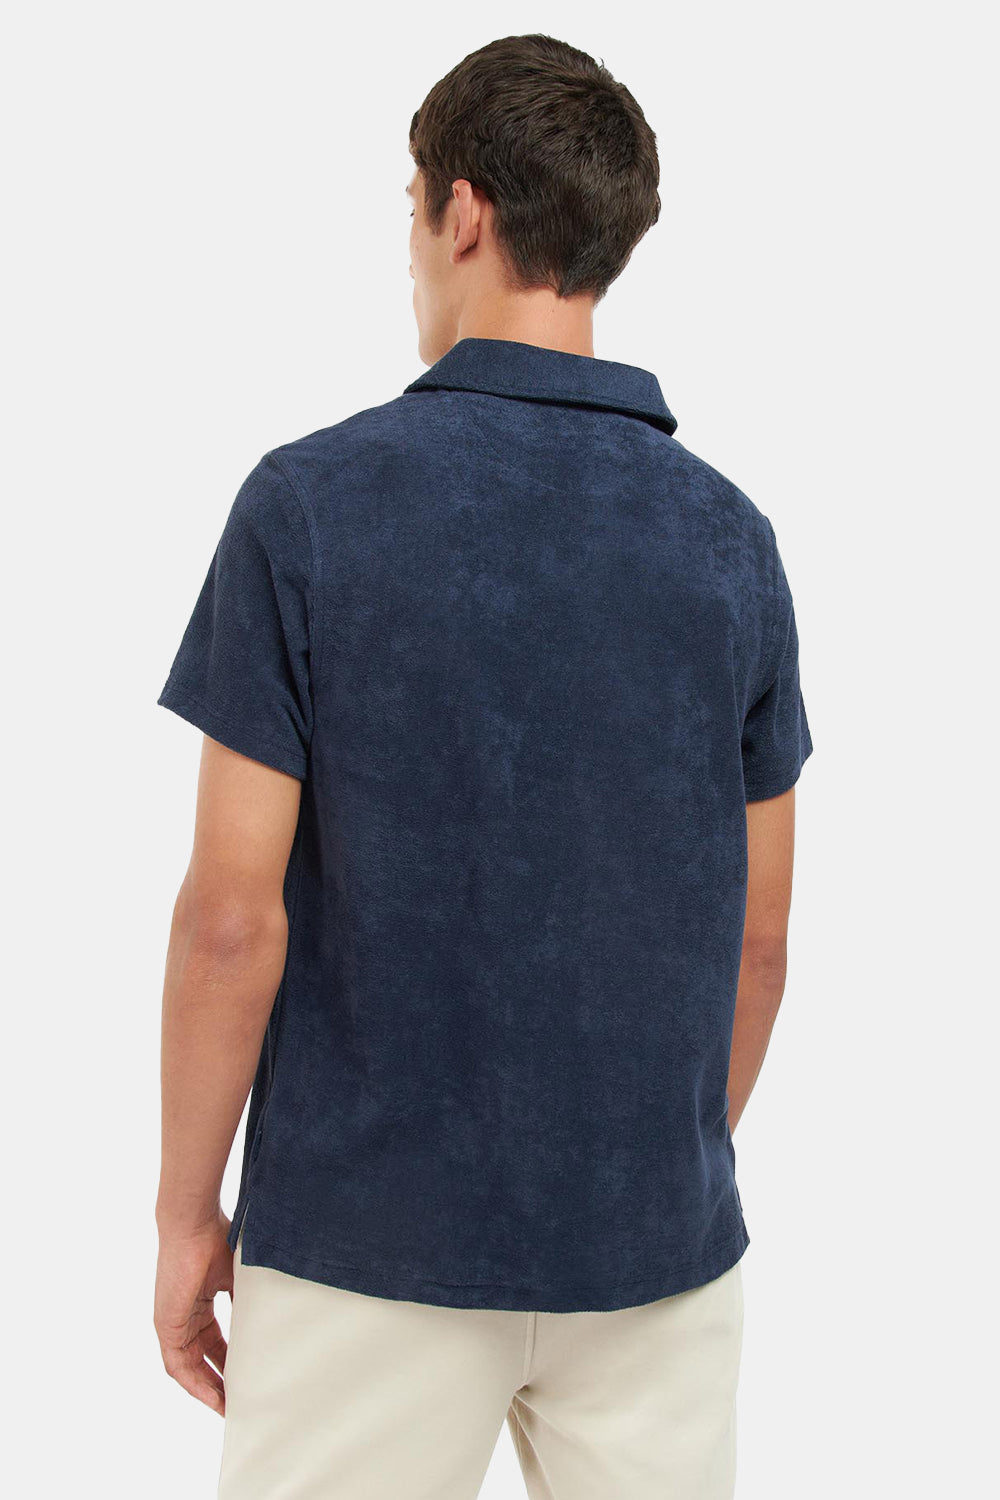 Barbour Cowes Polo (Navy)